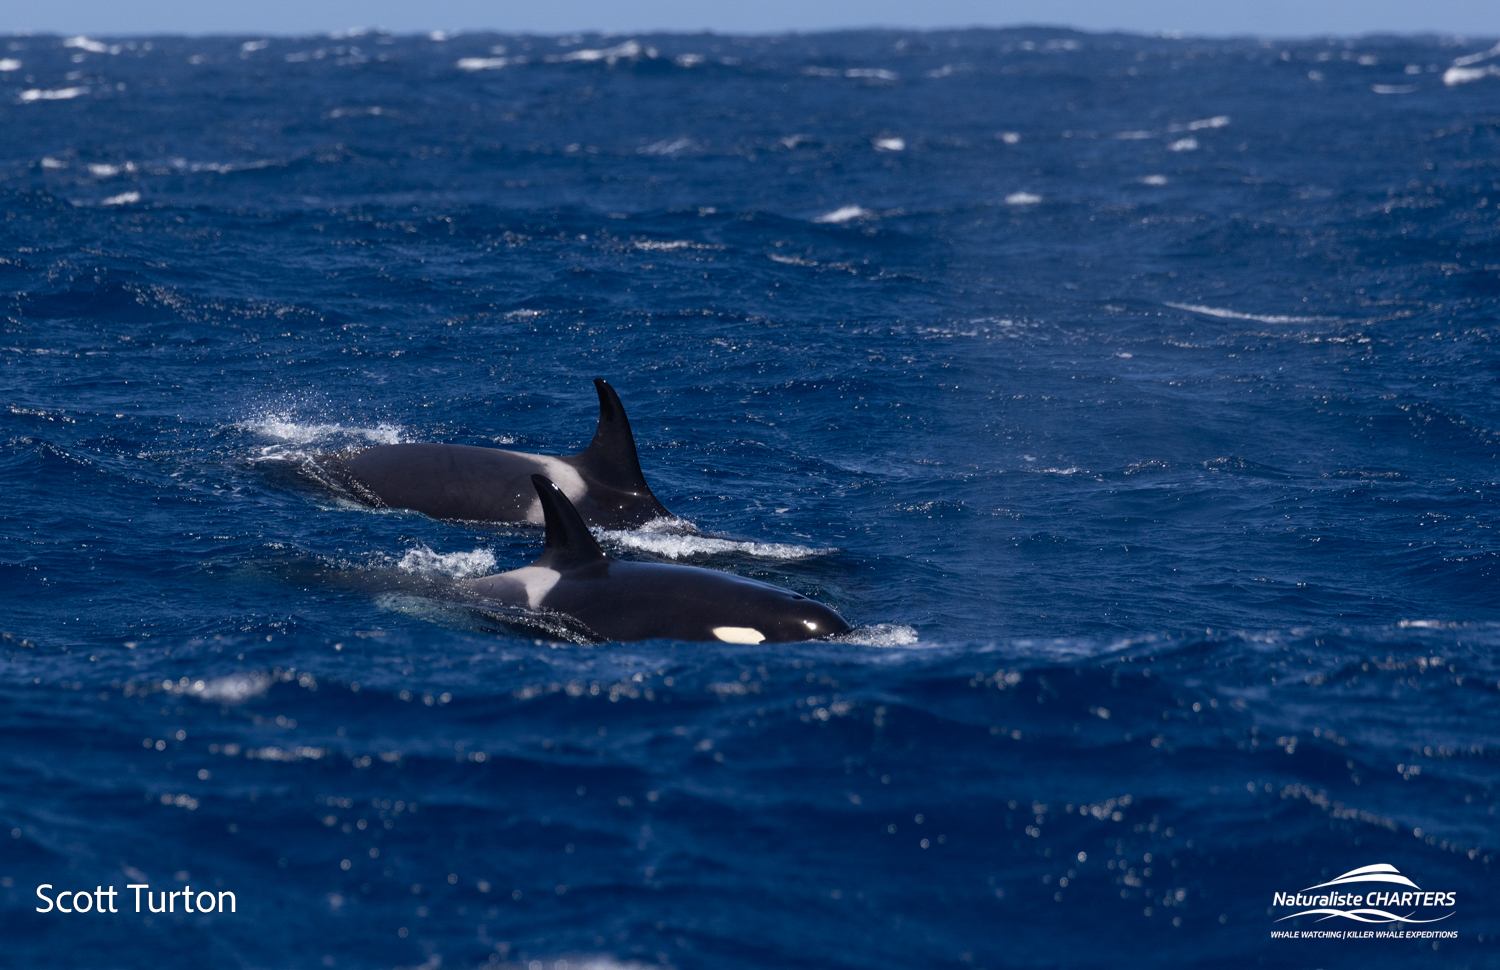 Encountering Killer Whales in Their Wild Habitat: A Thrilling Adventure